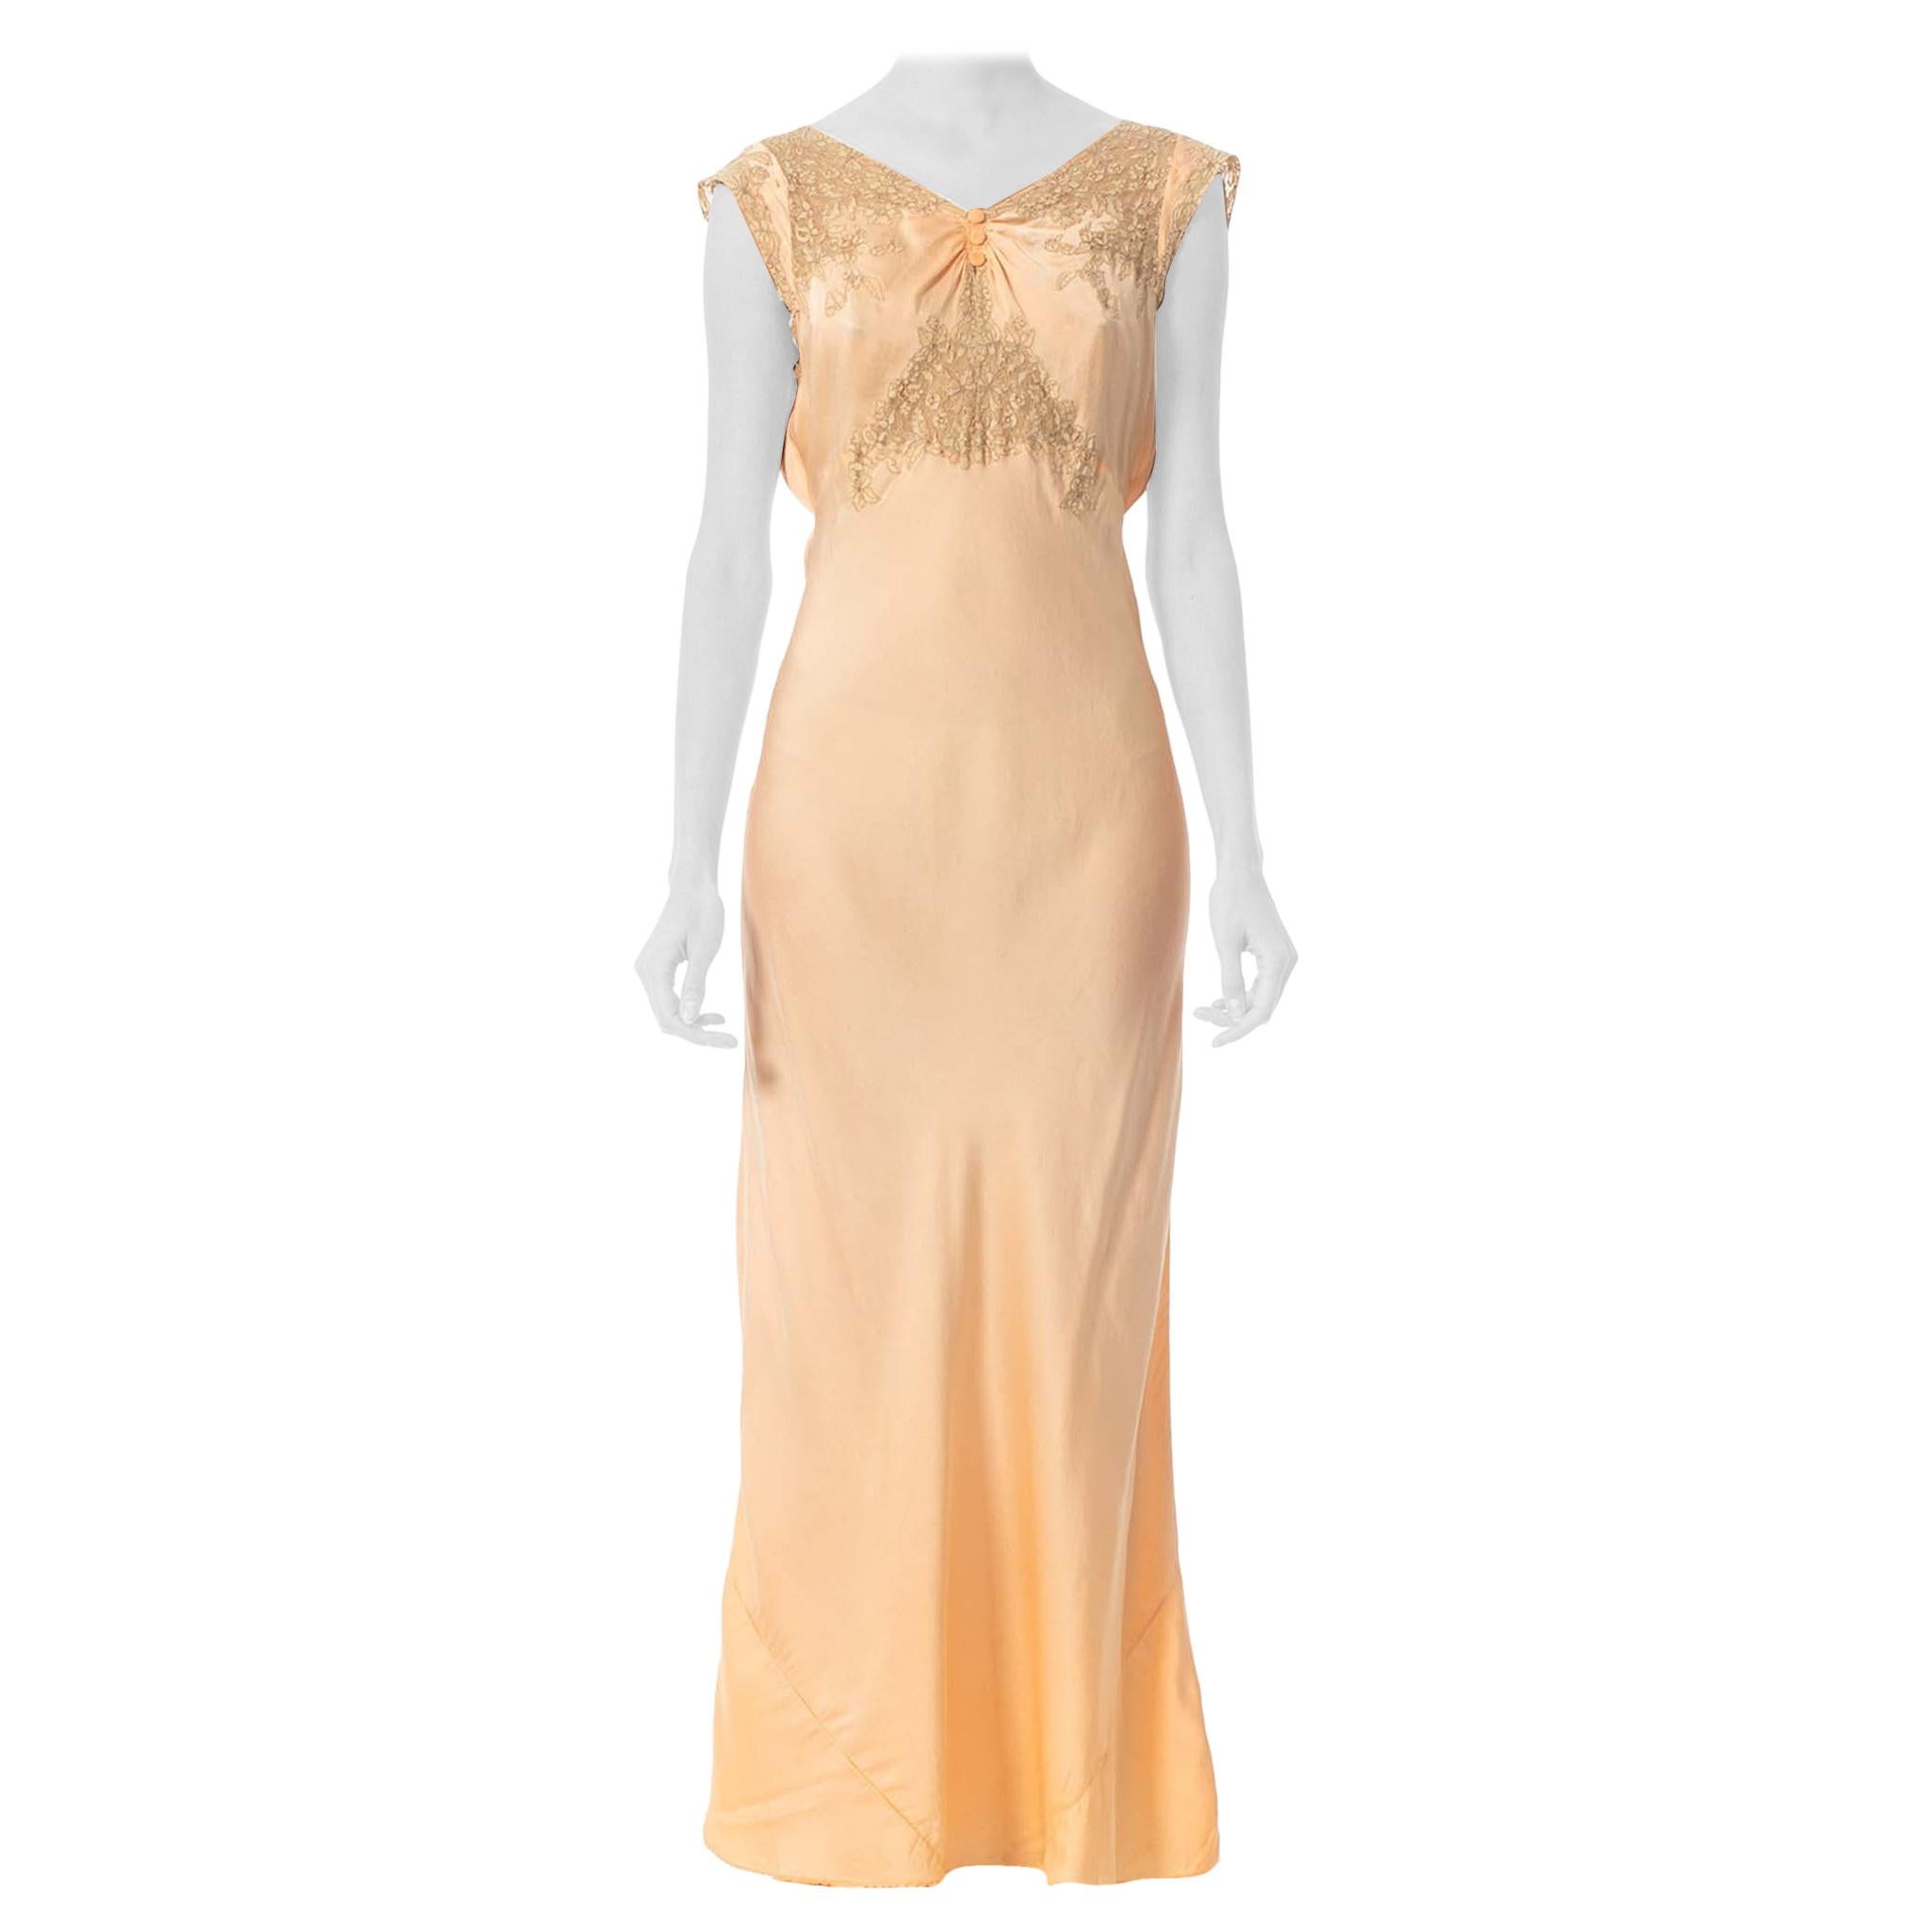 Blush Pink Bias Cut Silk Charmeuse & Lace Negligee With Side Ties